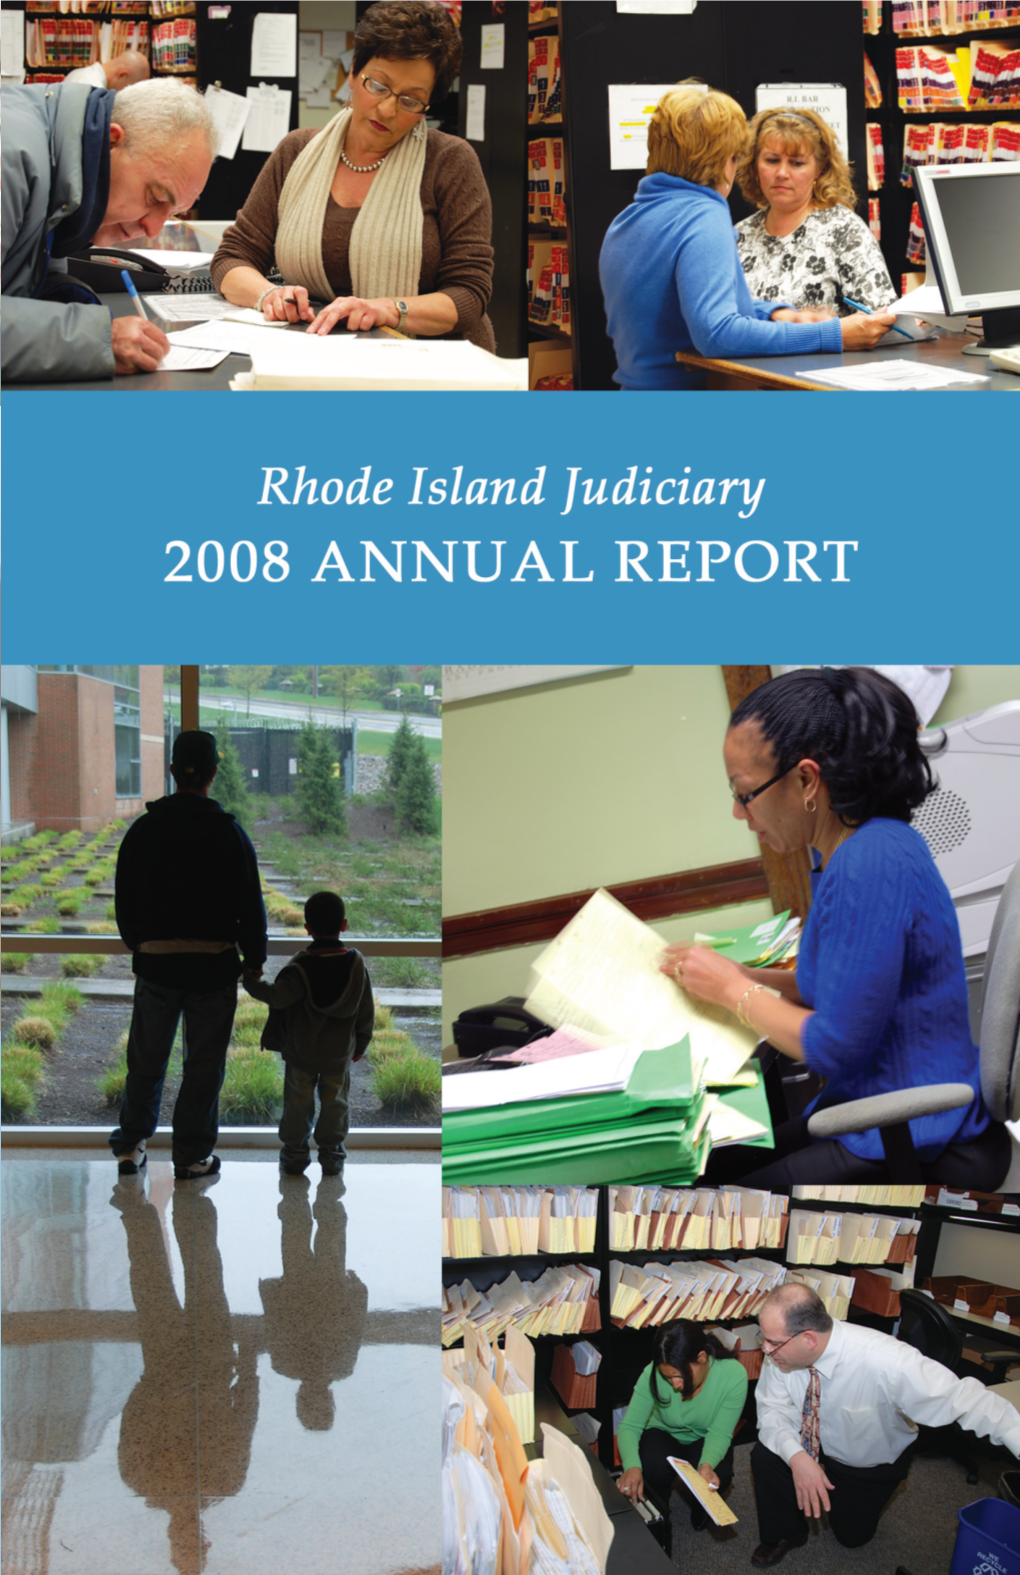 2008 Annual Report of the Rhode Island Judiciary, Pursuant to G.L